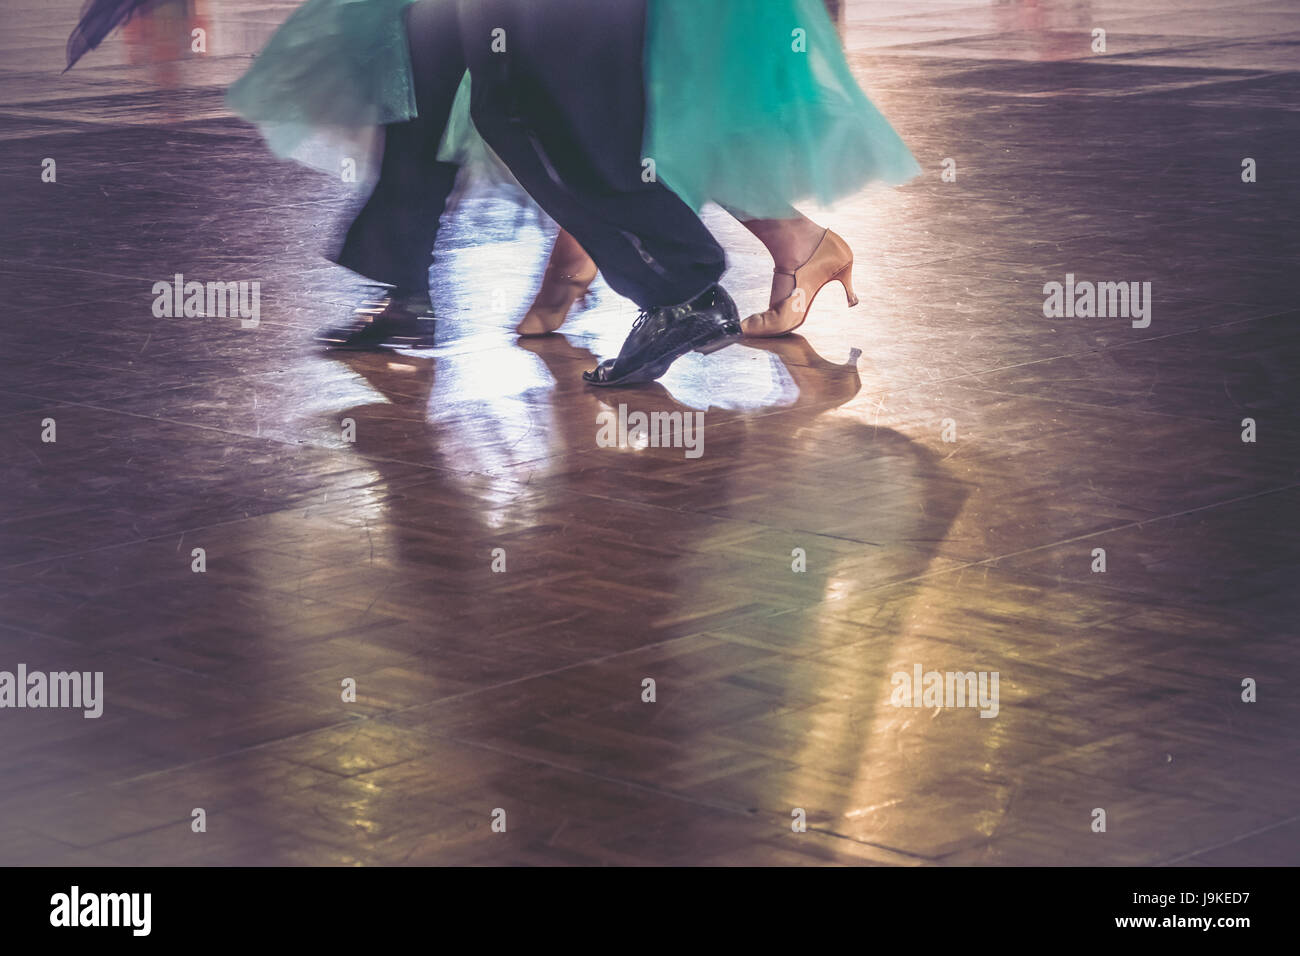 Motion blur of couple dancers in a dance spotlight on the floor, during Grand Slam Standard dance. Stock Photo